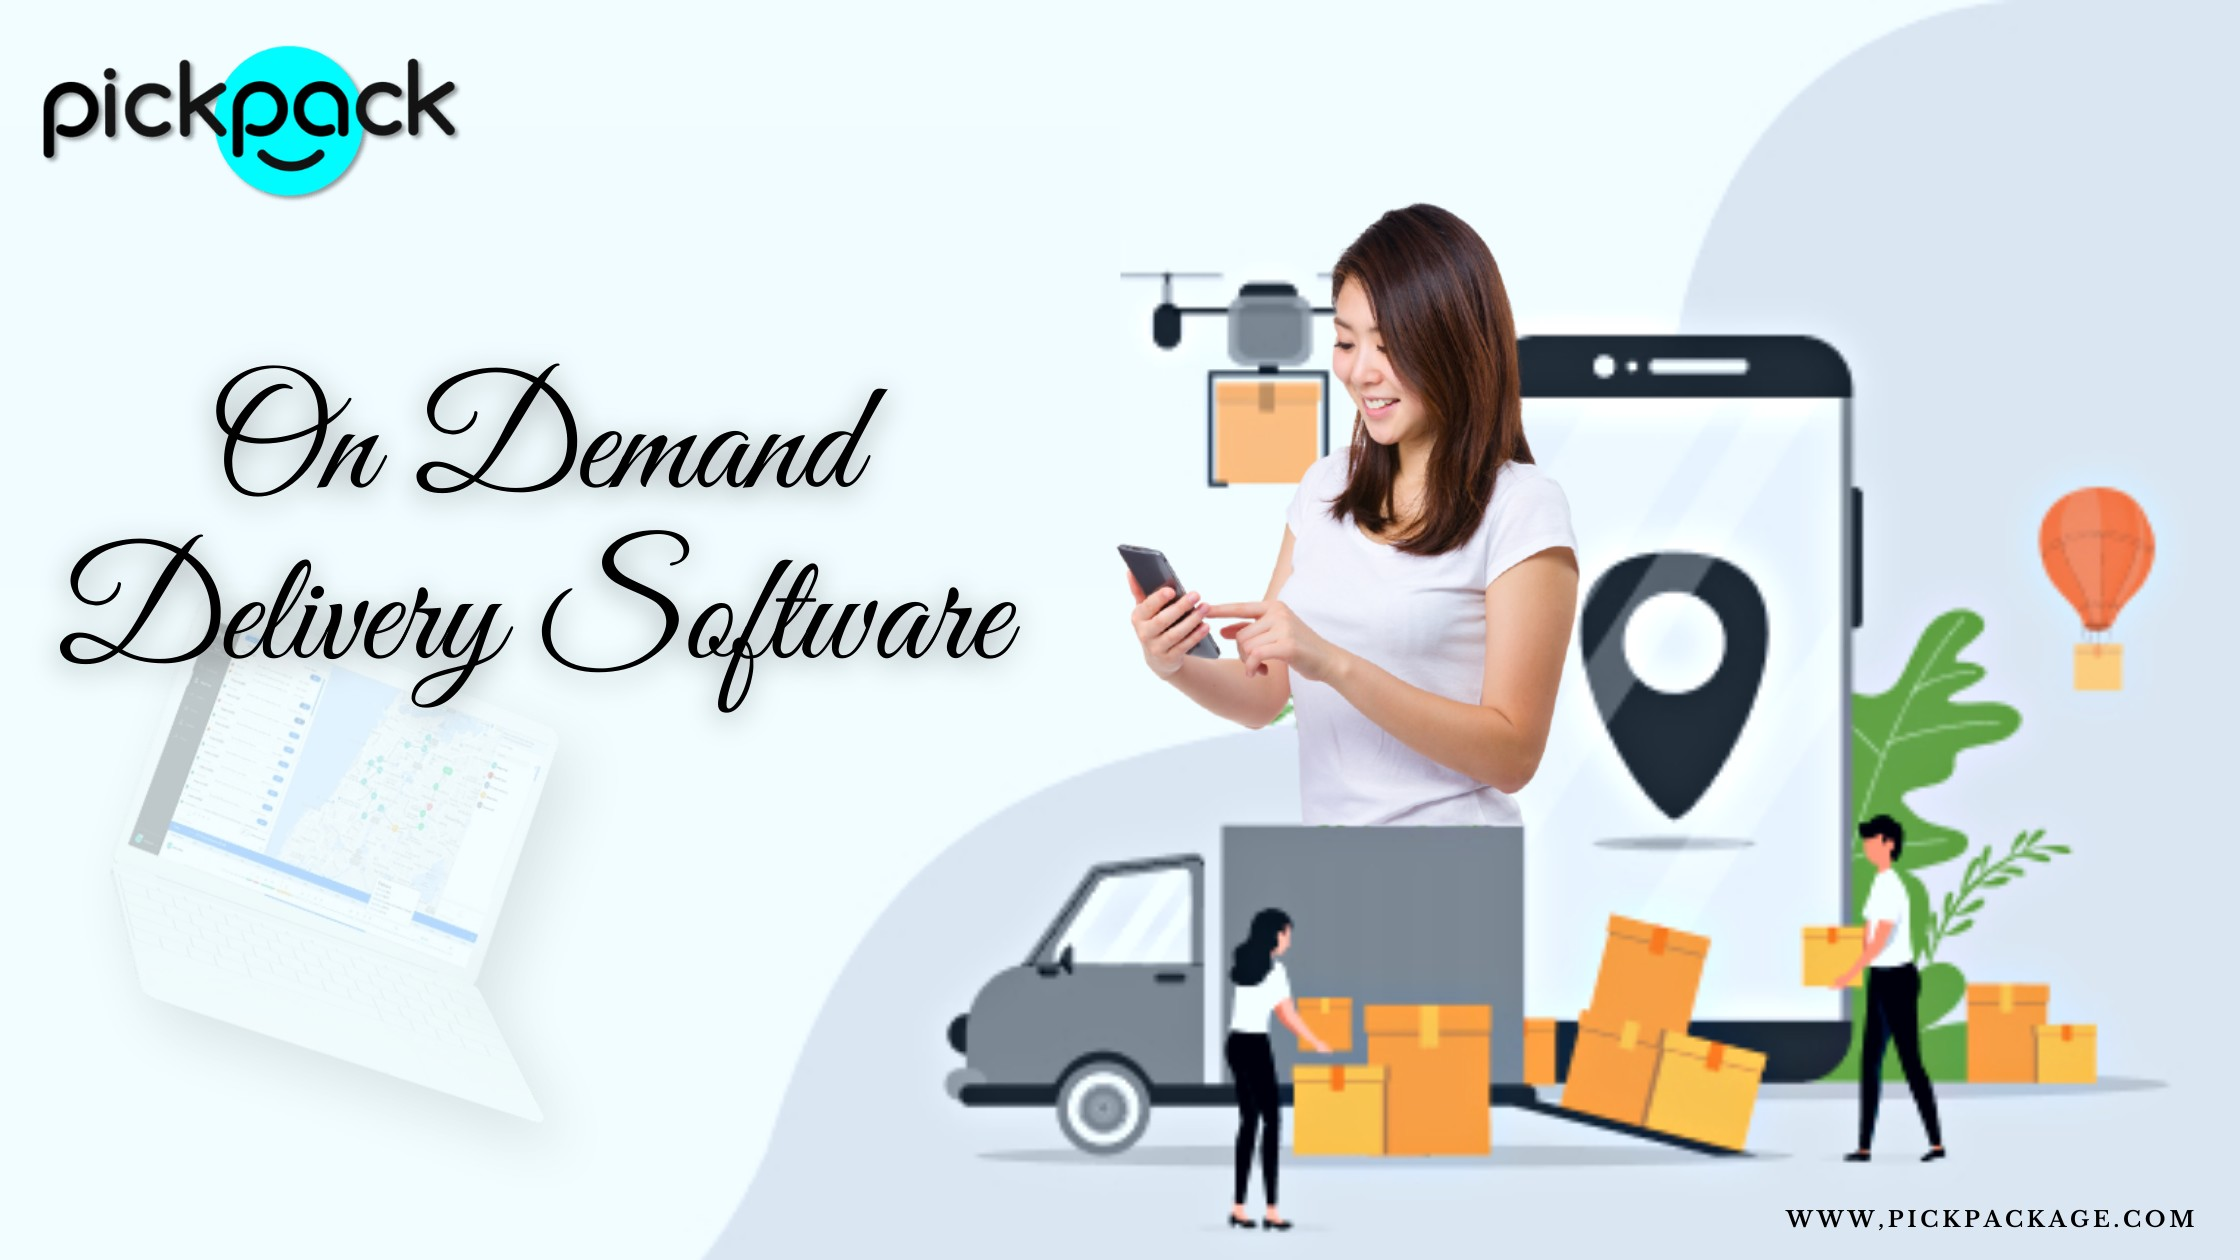 On Demand Delivery Software - A Complete Solution For Managers